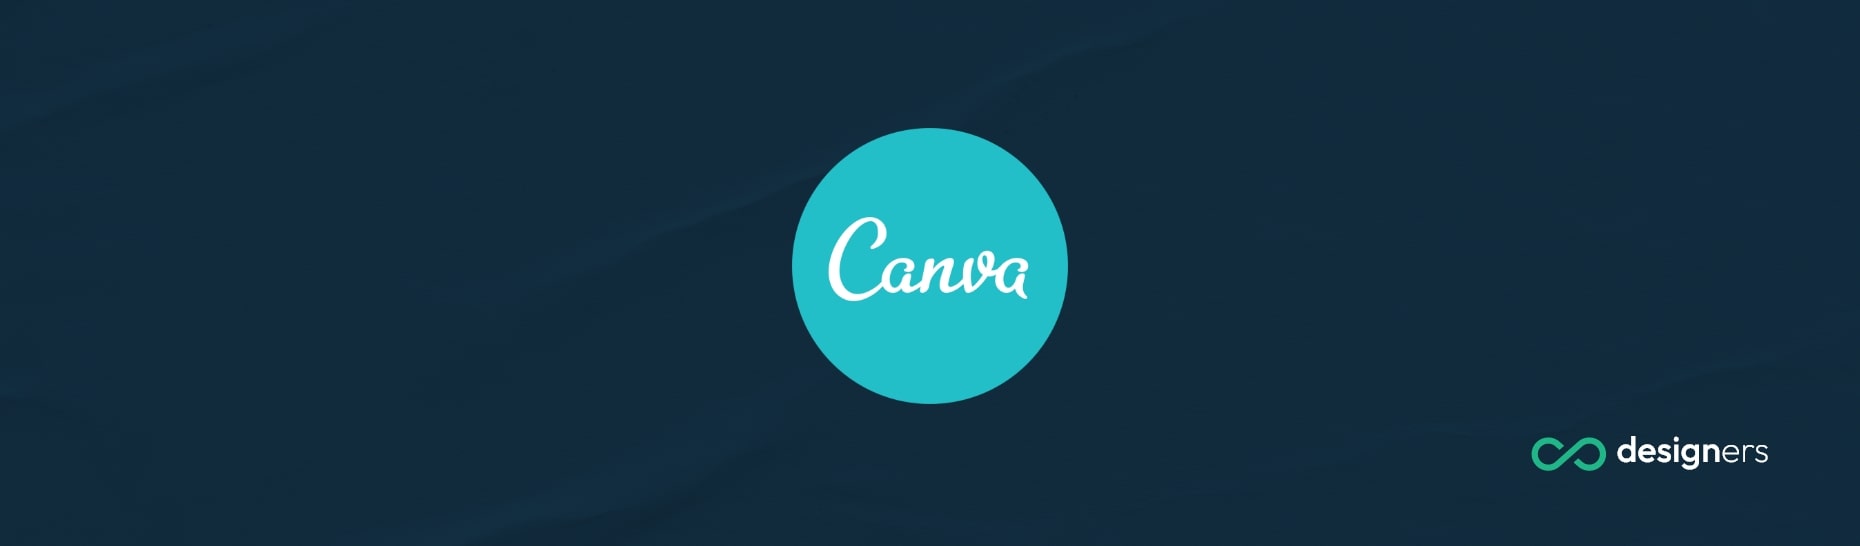 What Font Is Georgia in Canva?